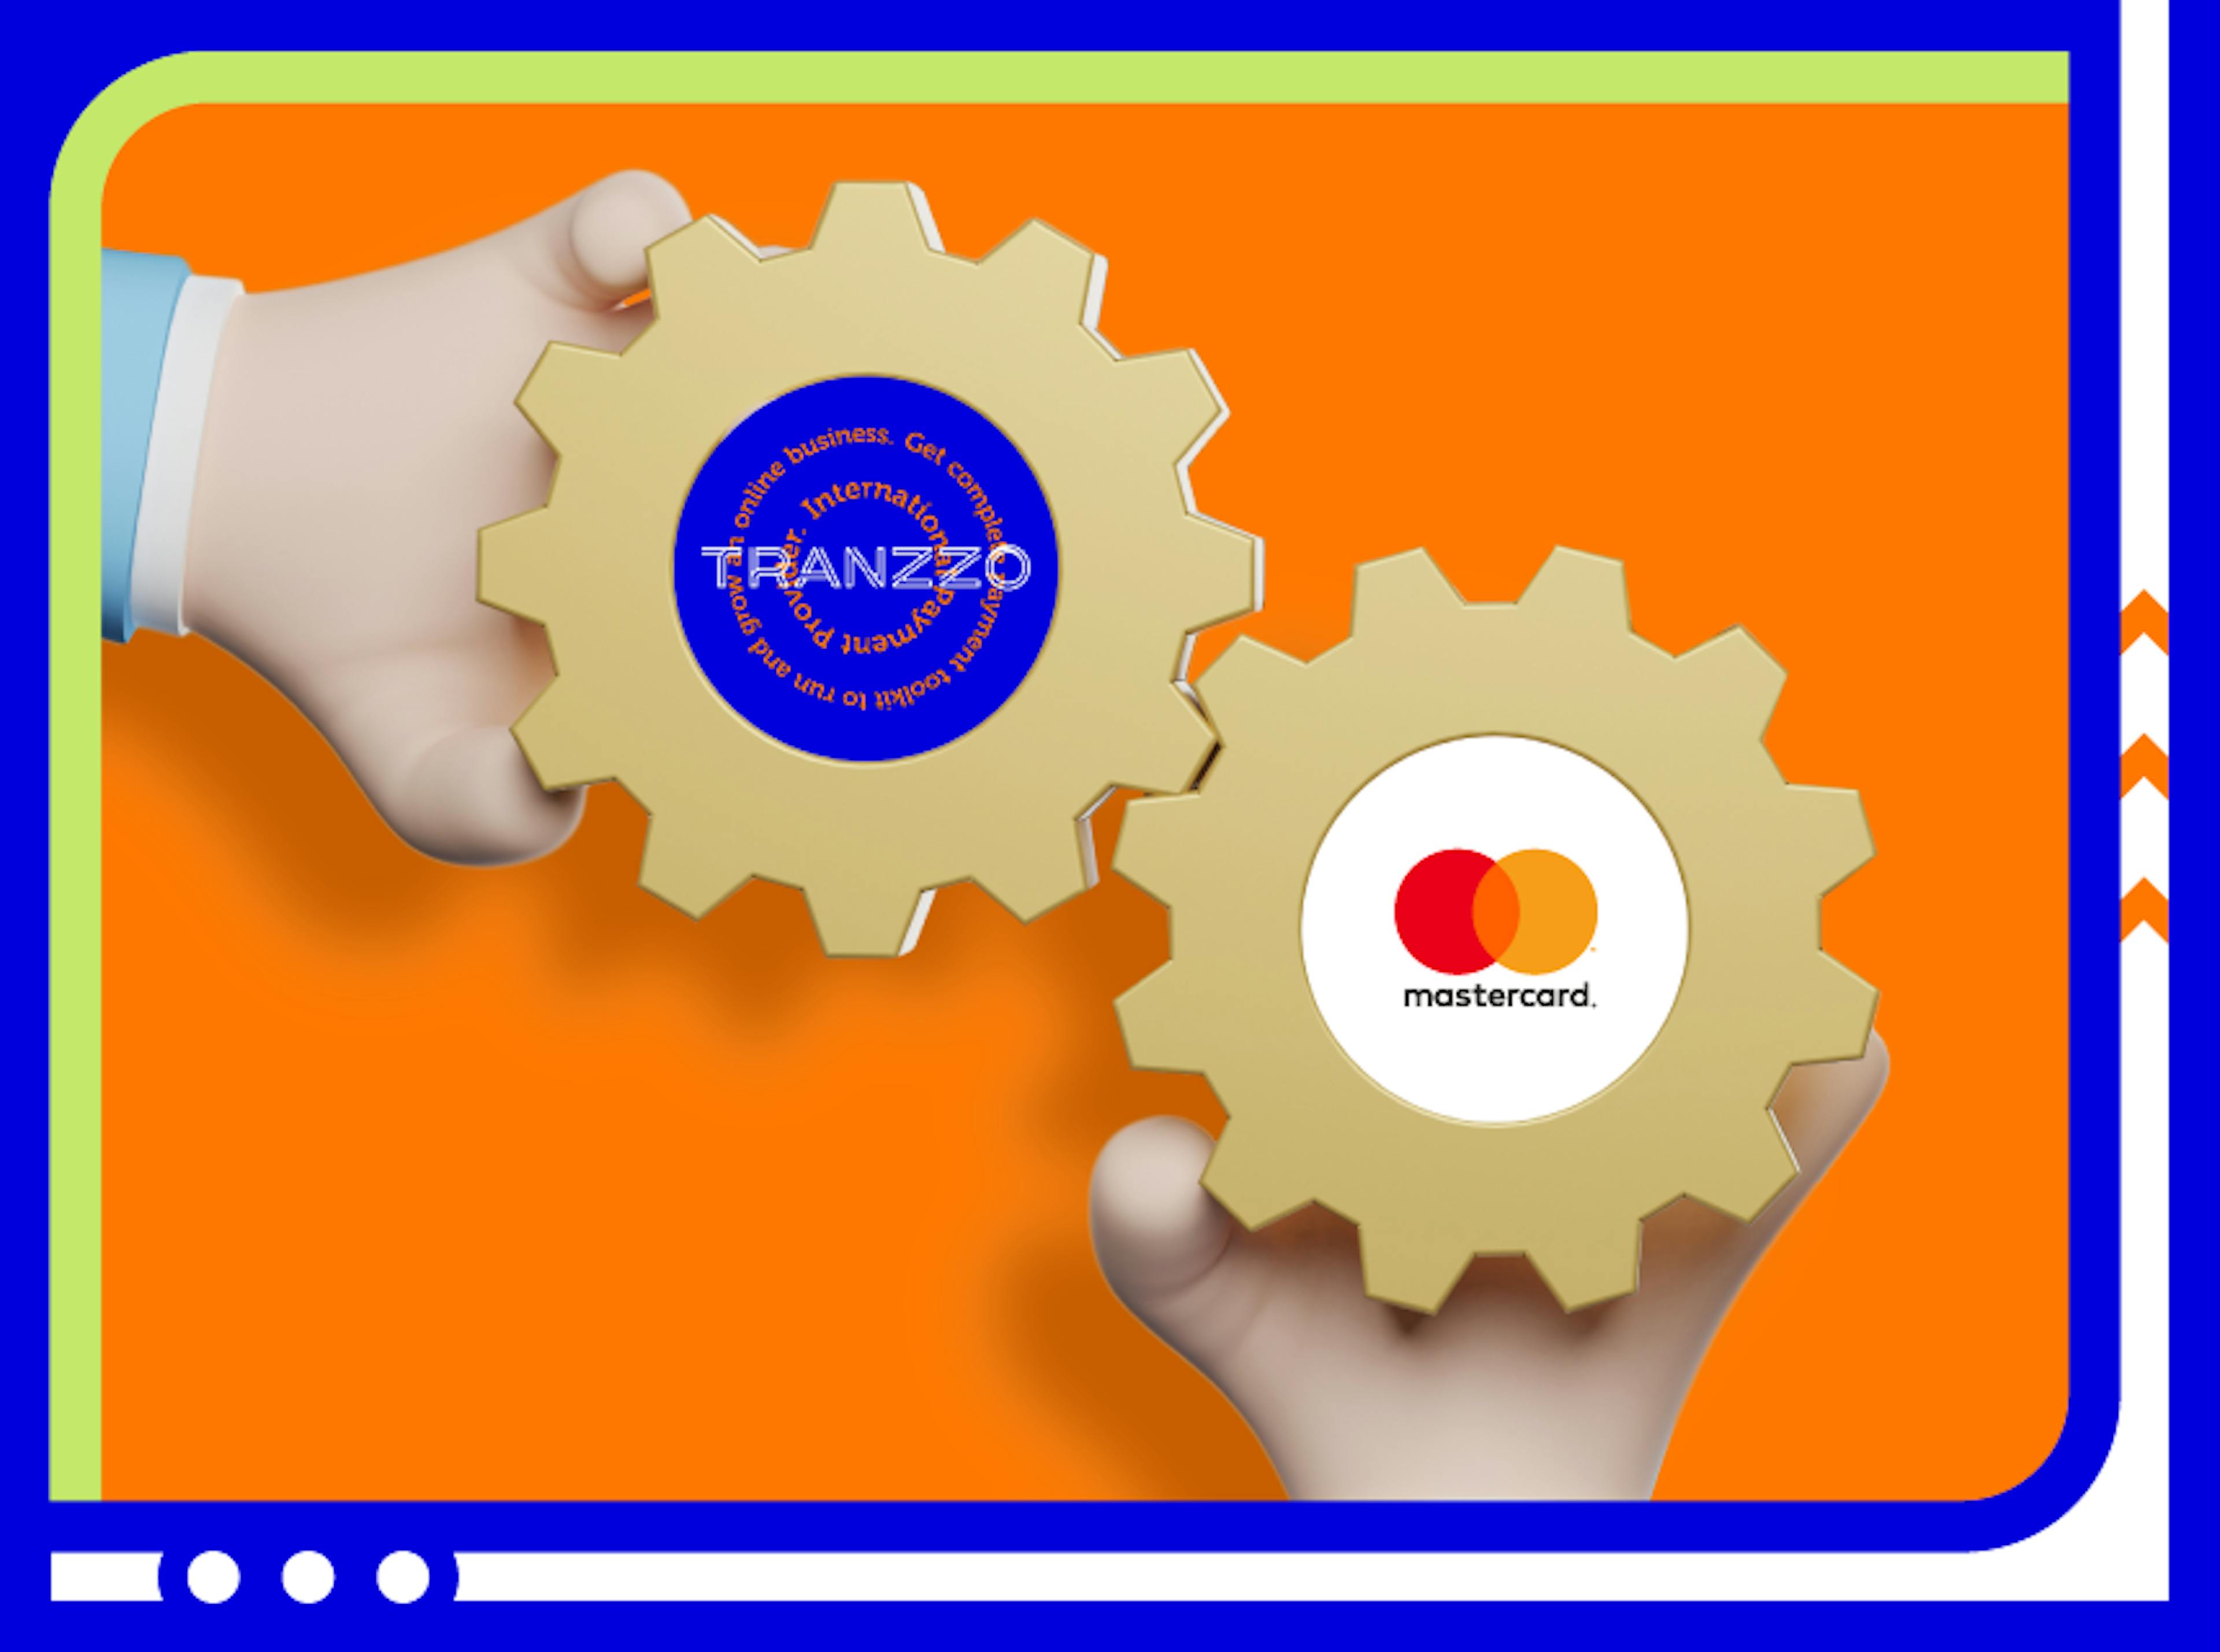 Tranzzo implemented a card tokenization solution from Mastercard